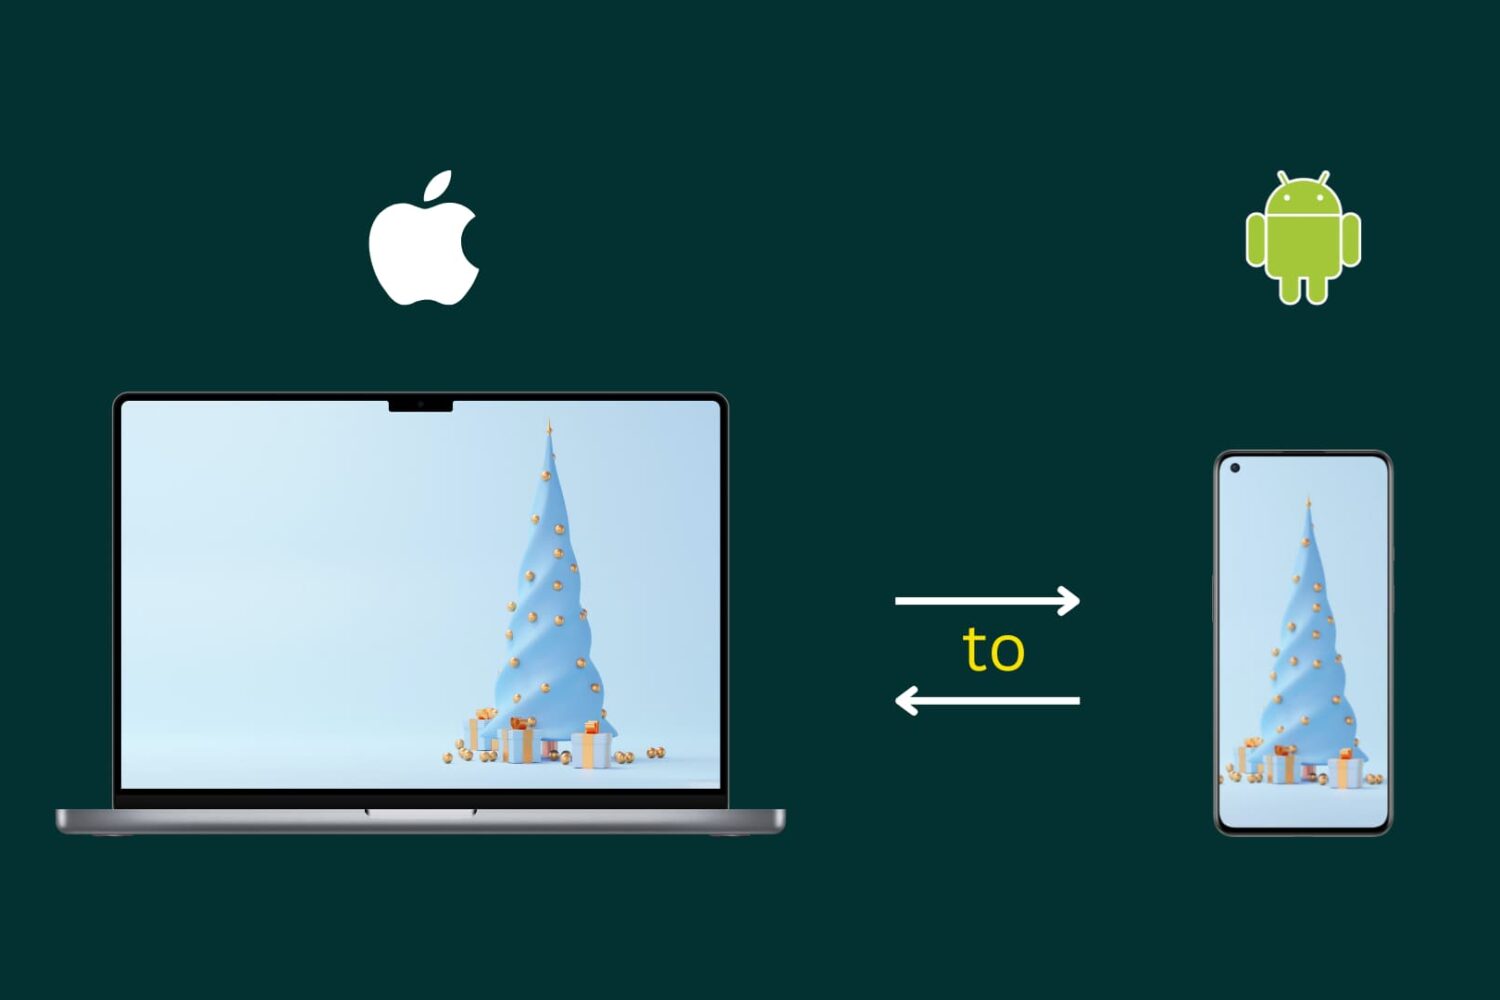 Image composition showing transfer of files from MacBook to Android phone and Android phone to Mac